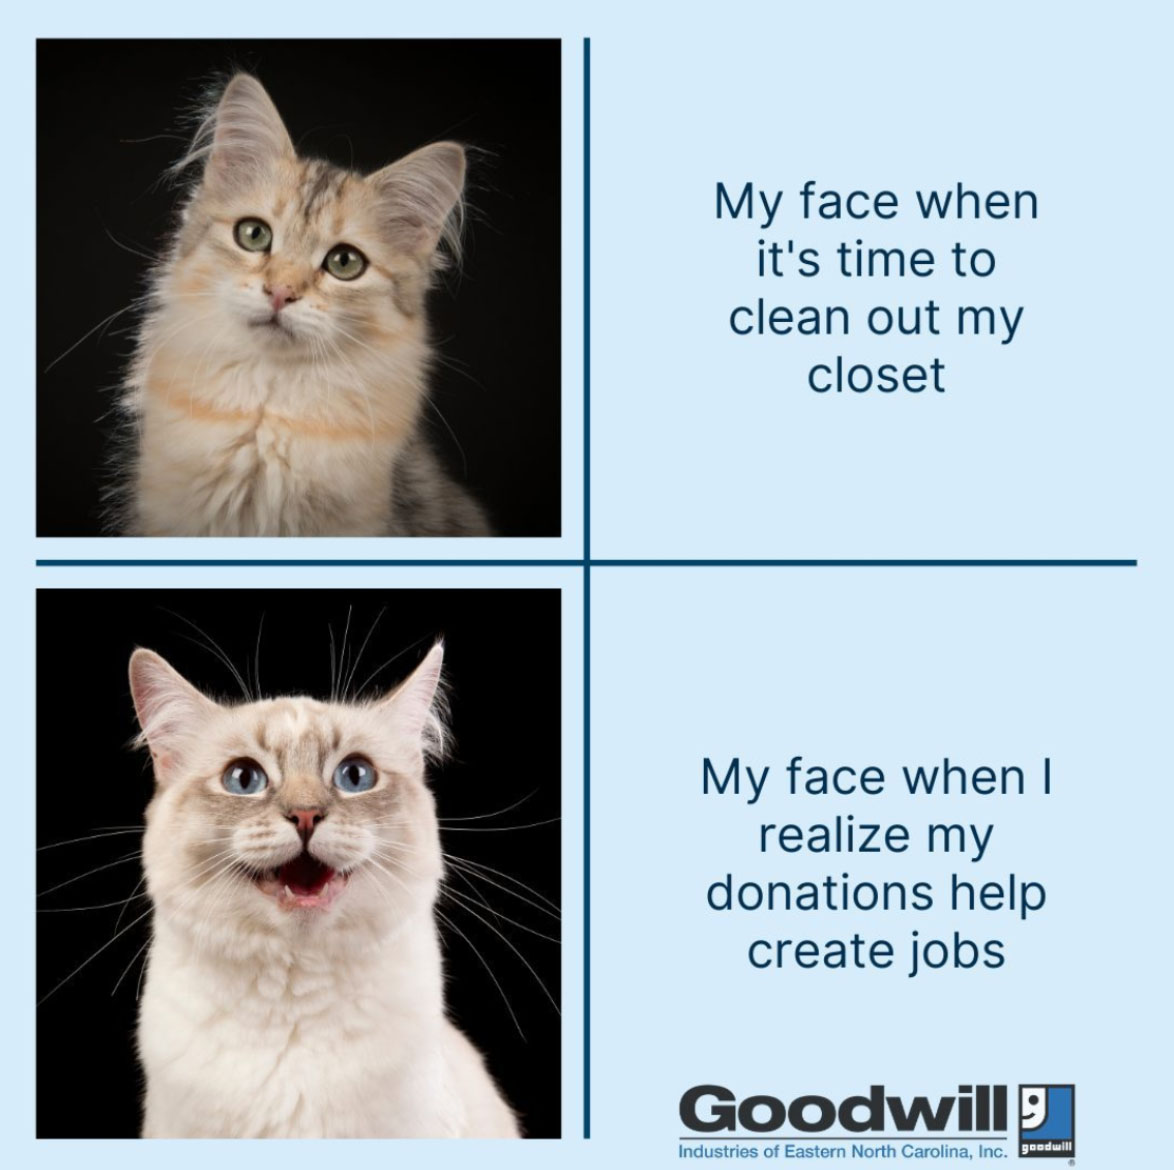 meme with sad cat becoming happy about donations creating jobs